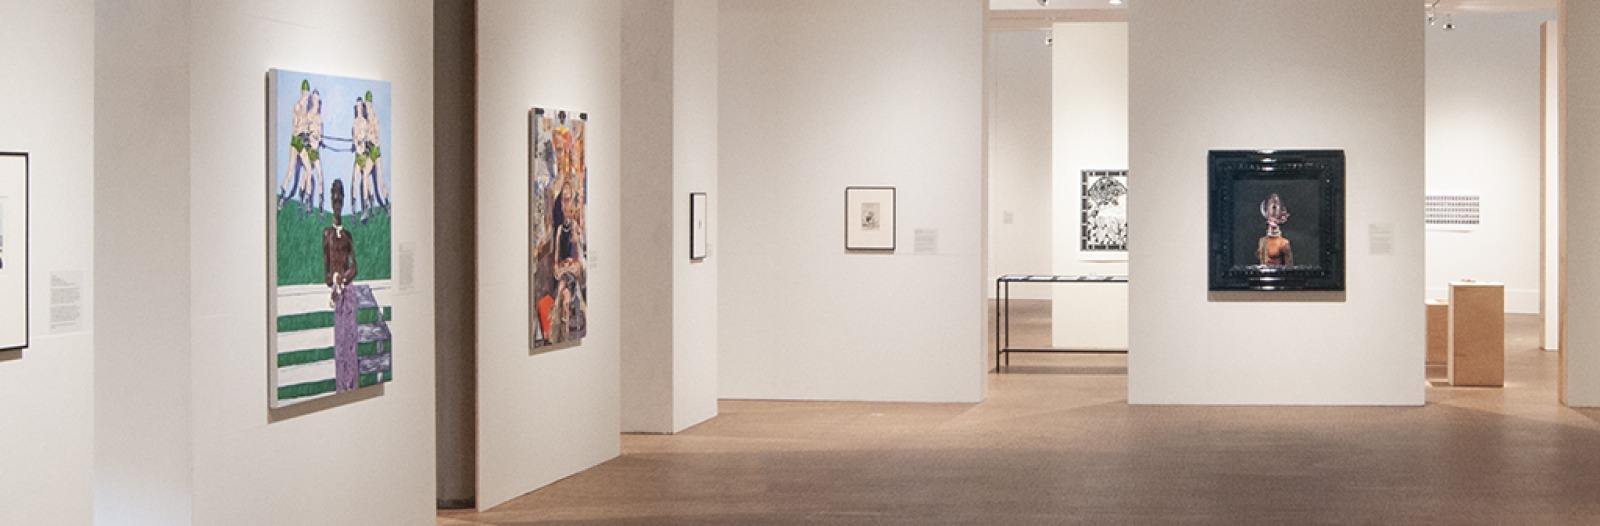 Installation view of works from the Museum collection